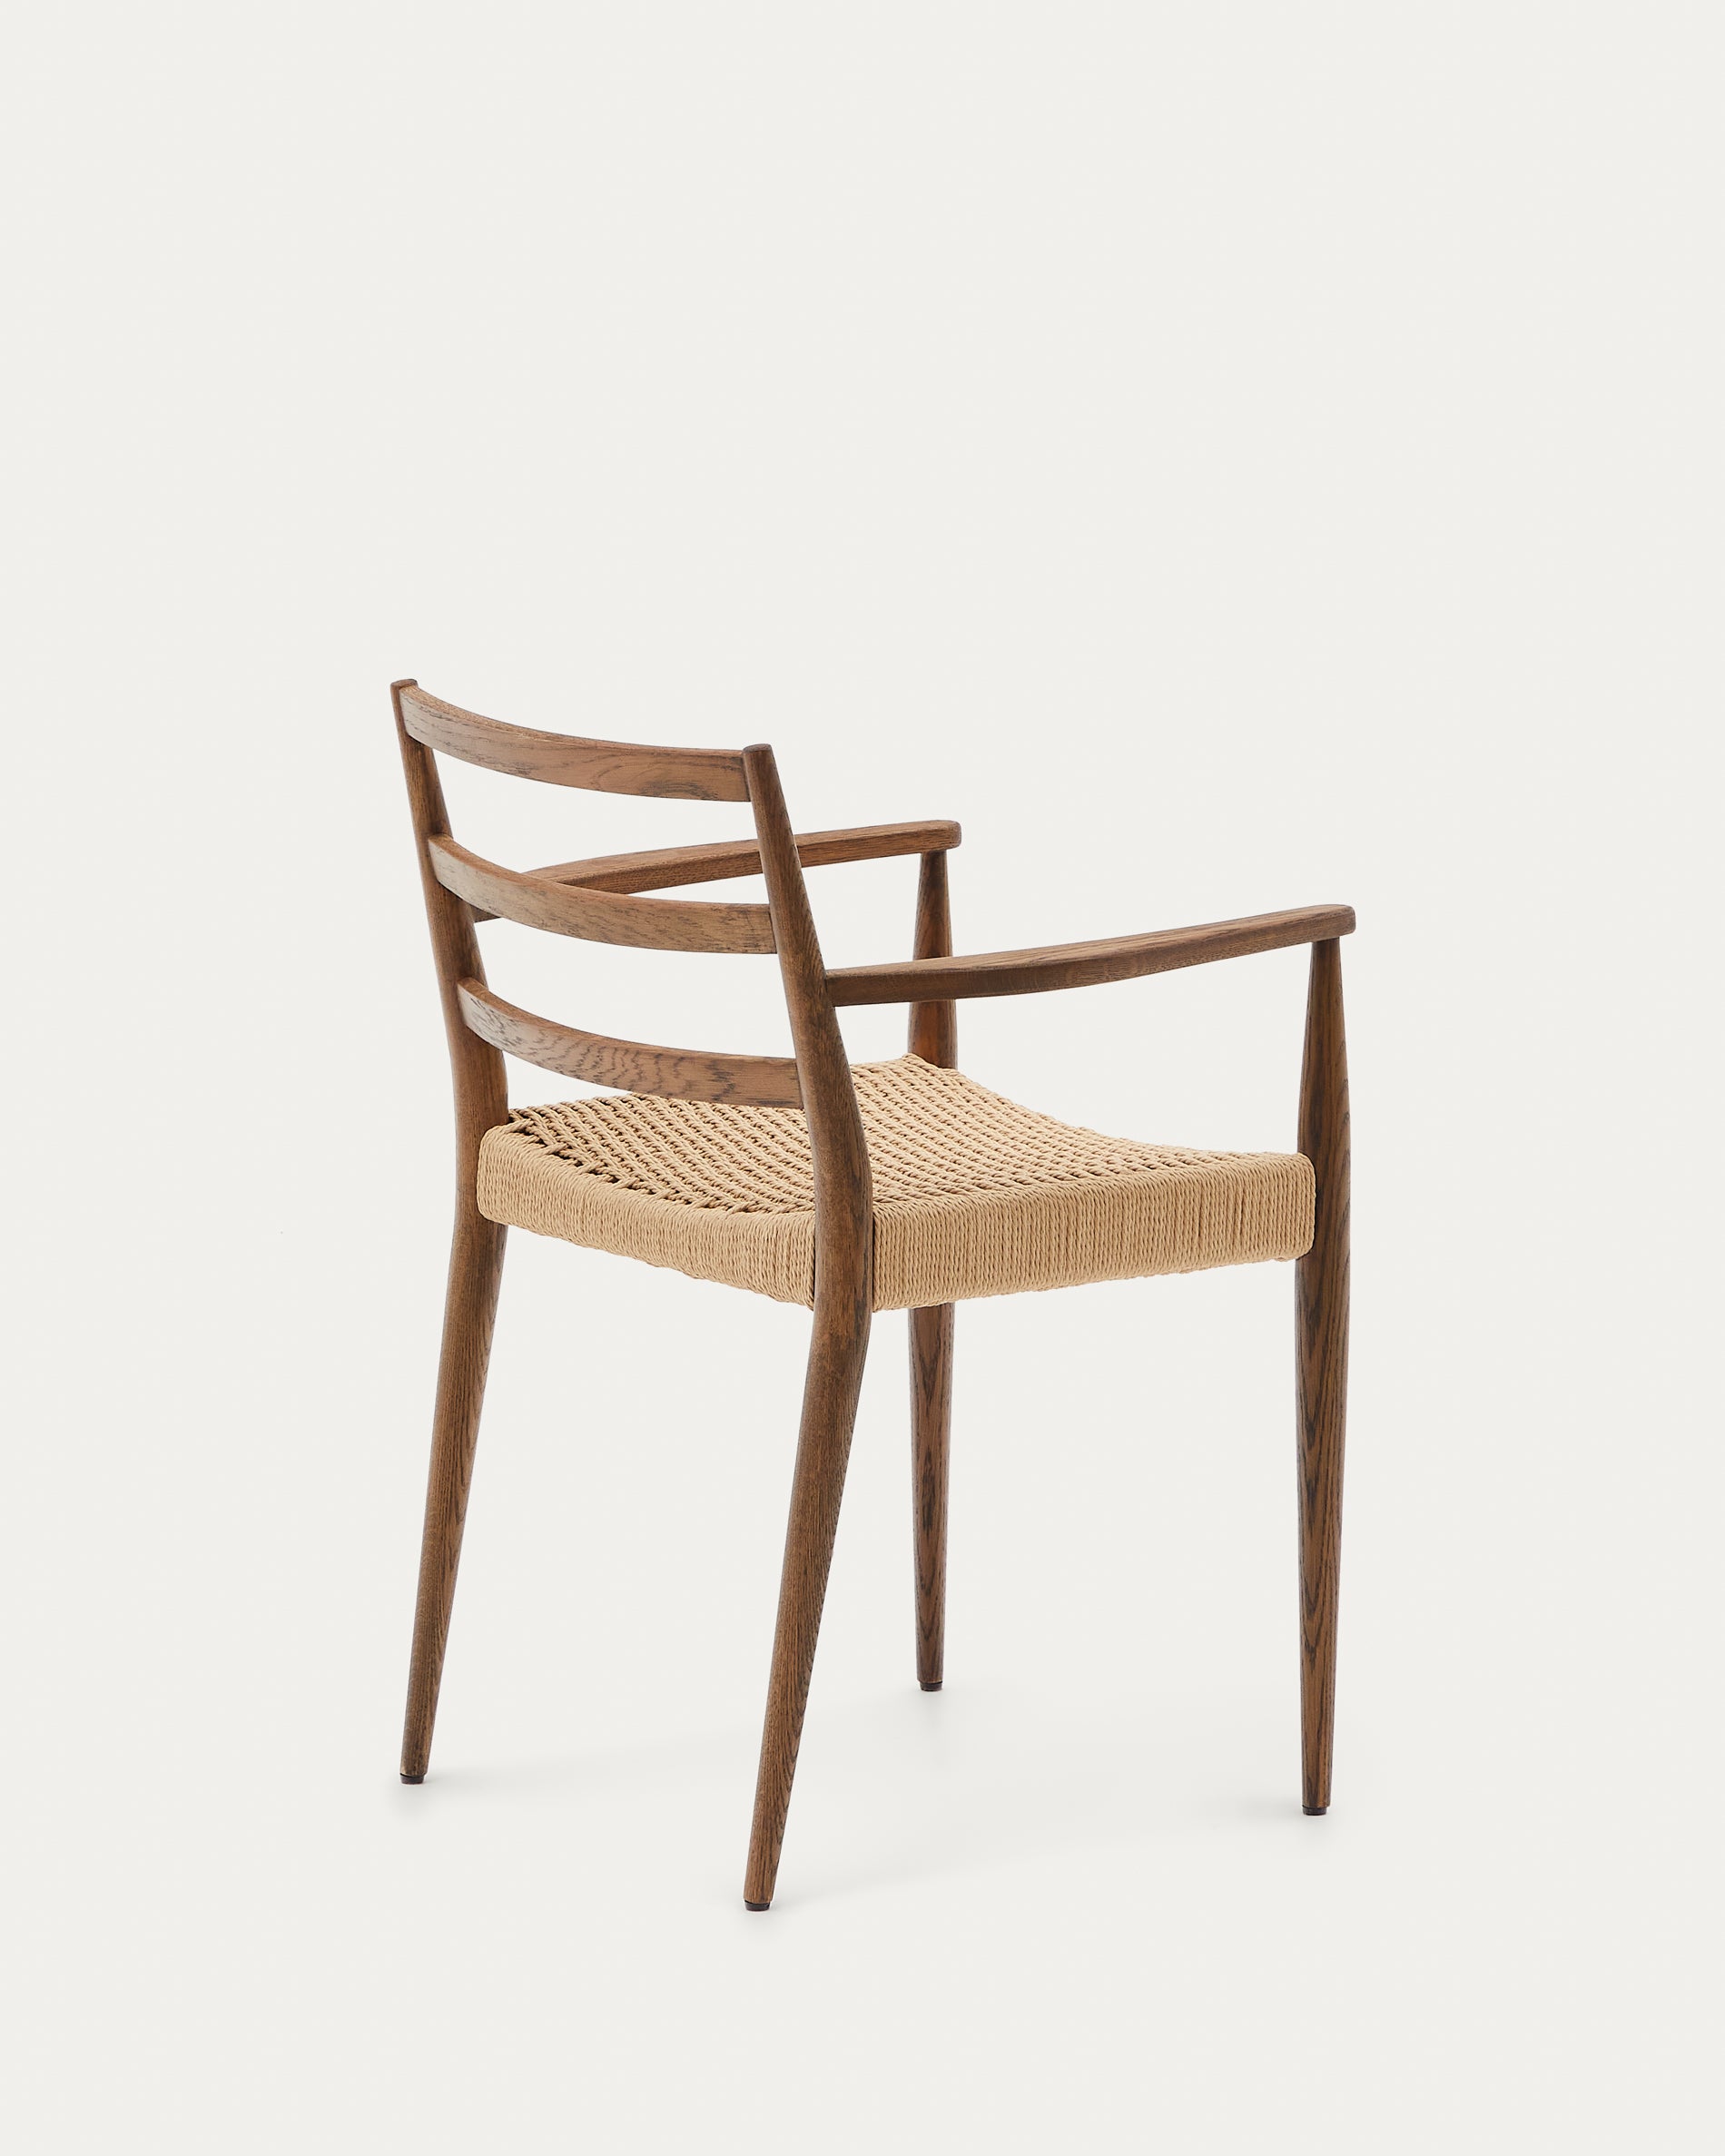 Analy chair with armrests, solid oak with walnut finish and 100% FSC rope seat